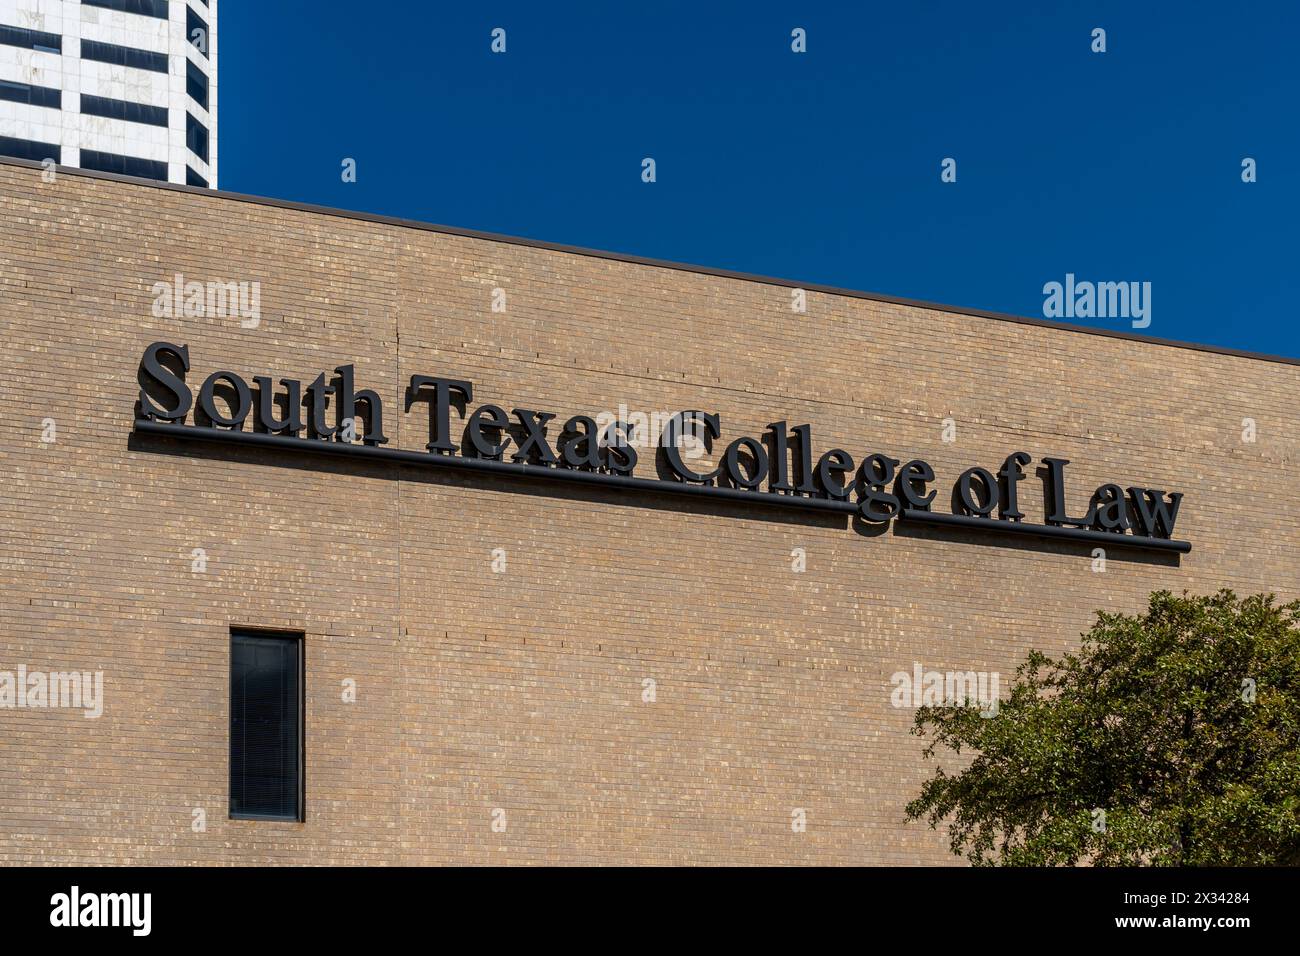 South Texas College of Law in Houston, Texas, USA. Stock Photo